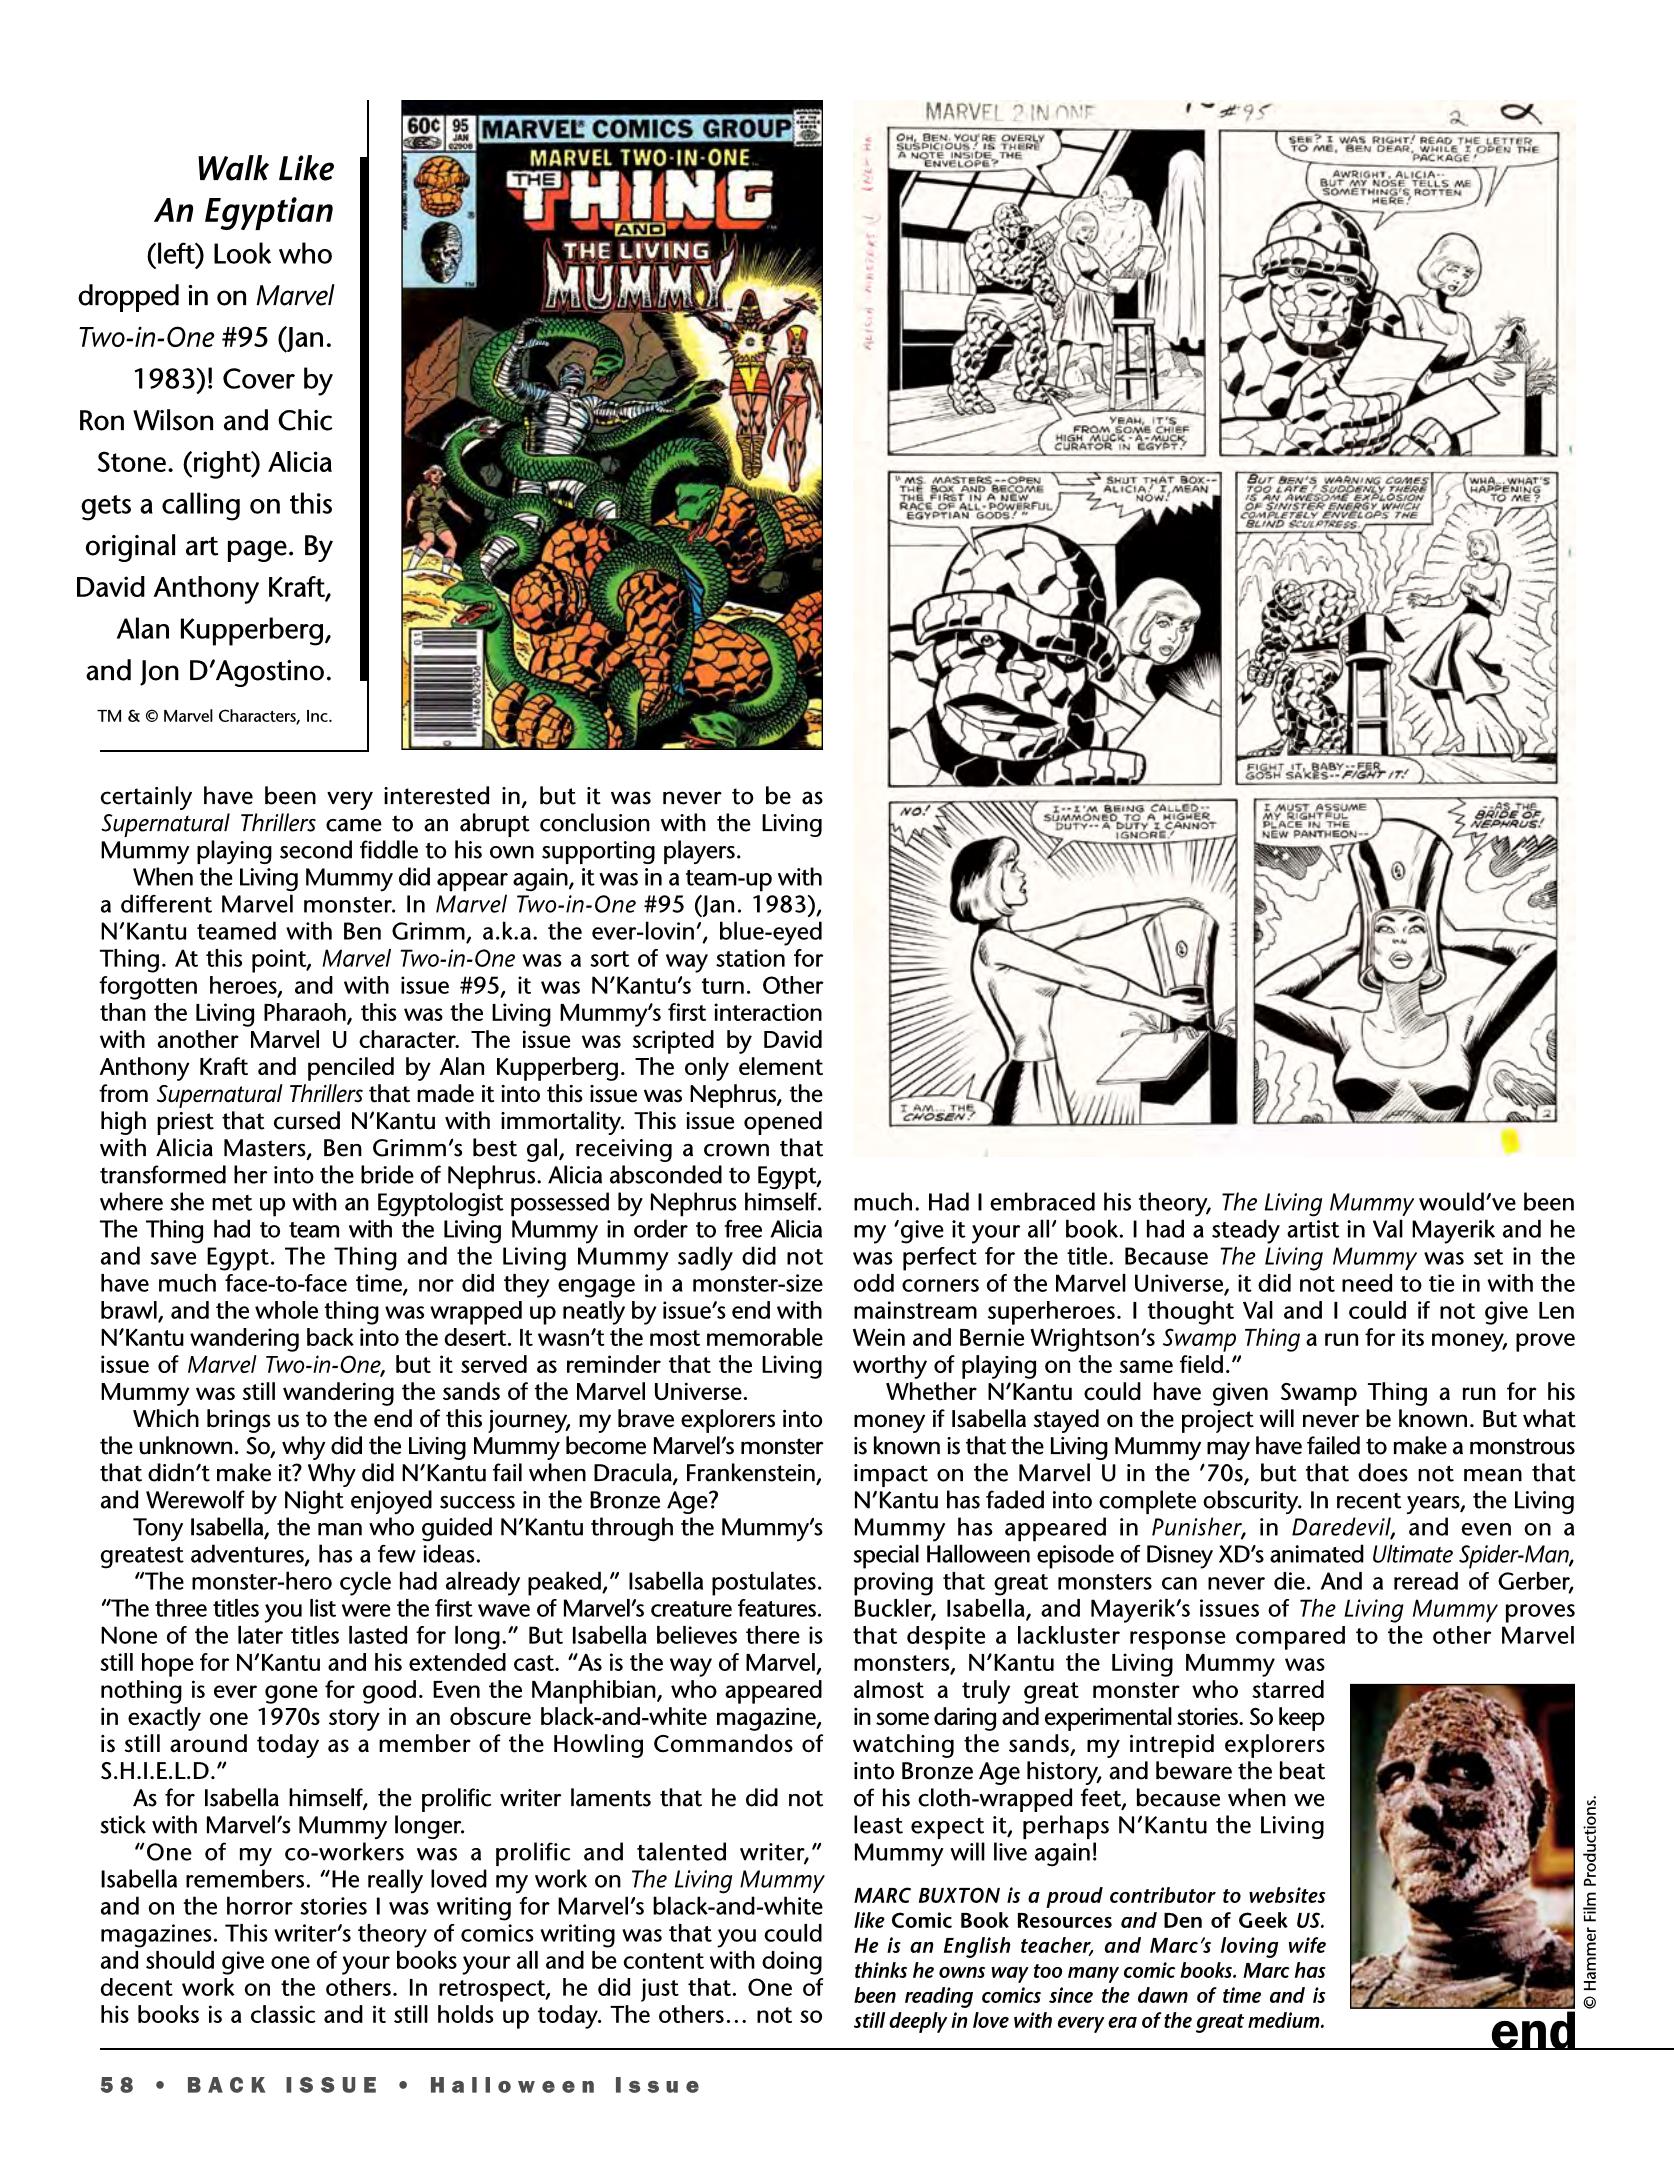 Read online Back Issue comic -  Issue #92 - 57